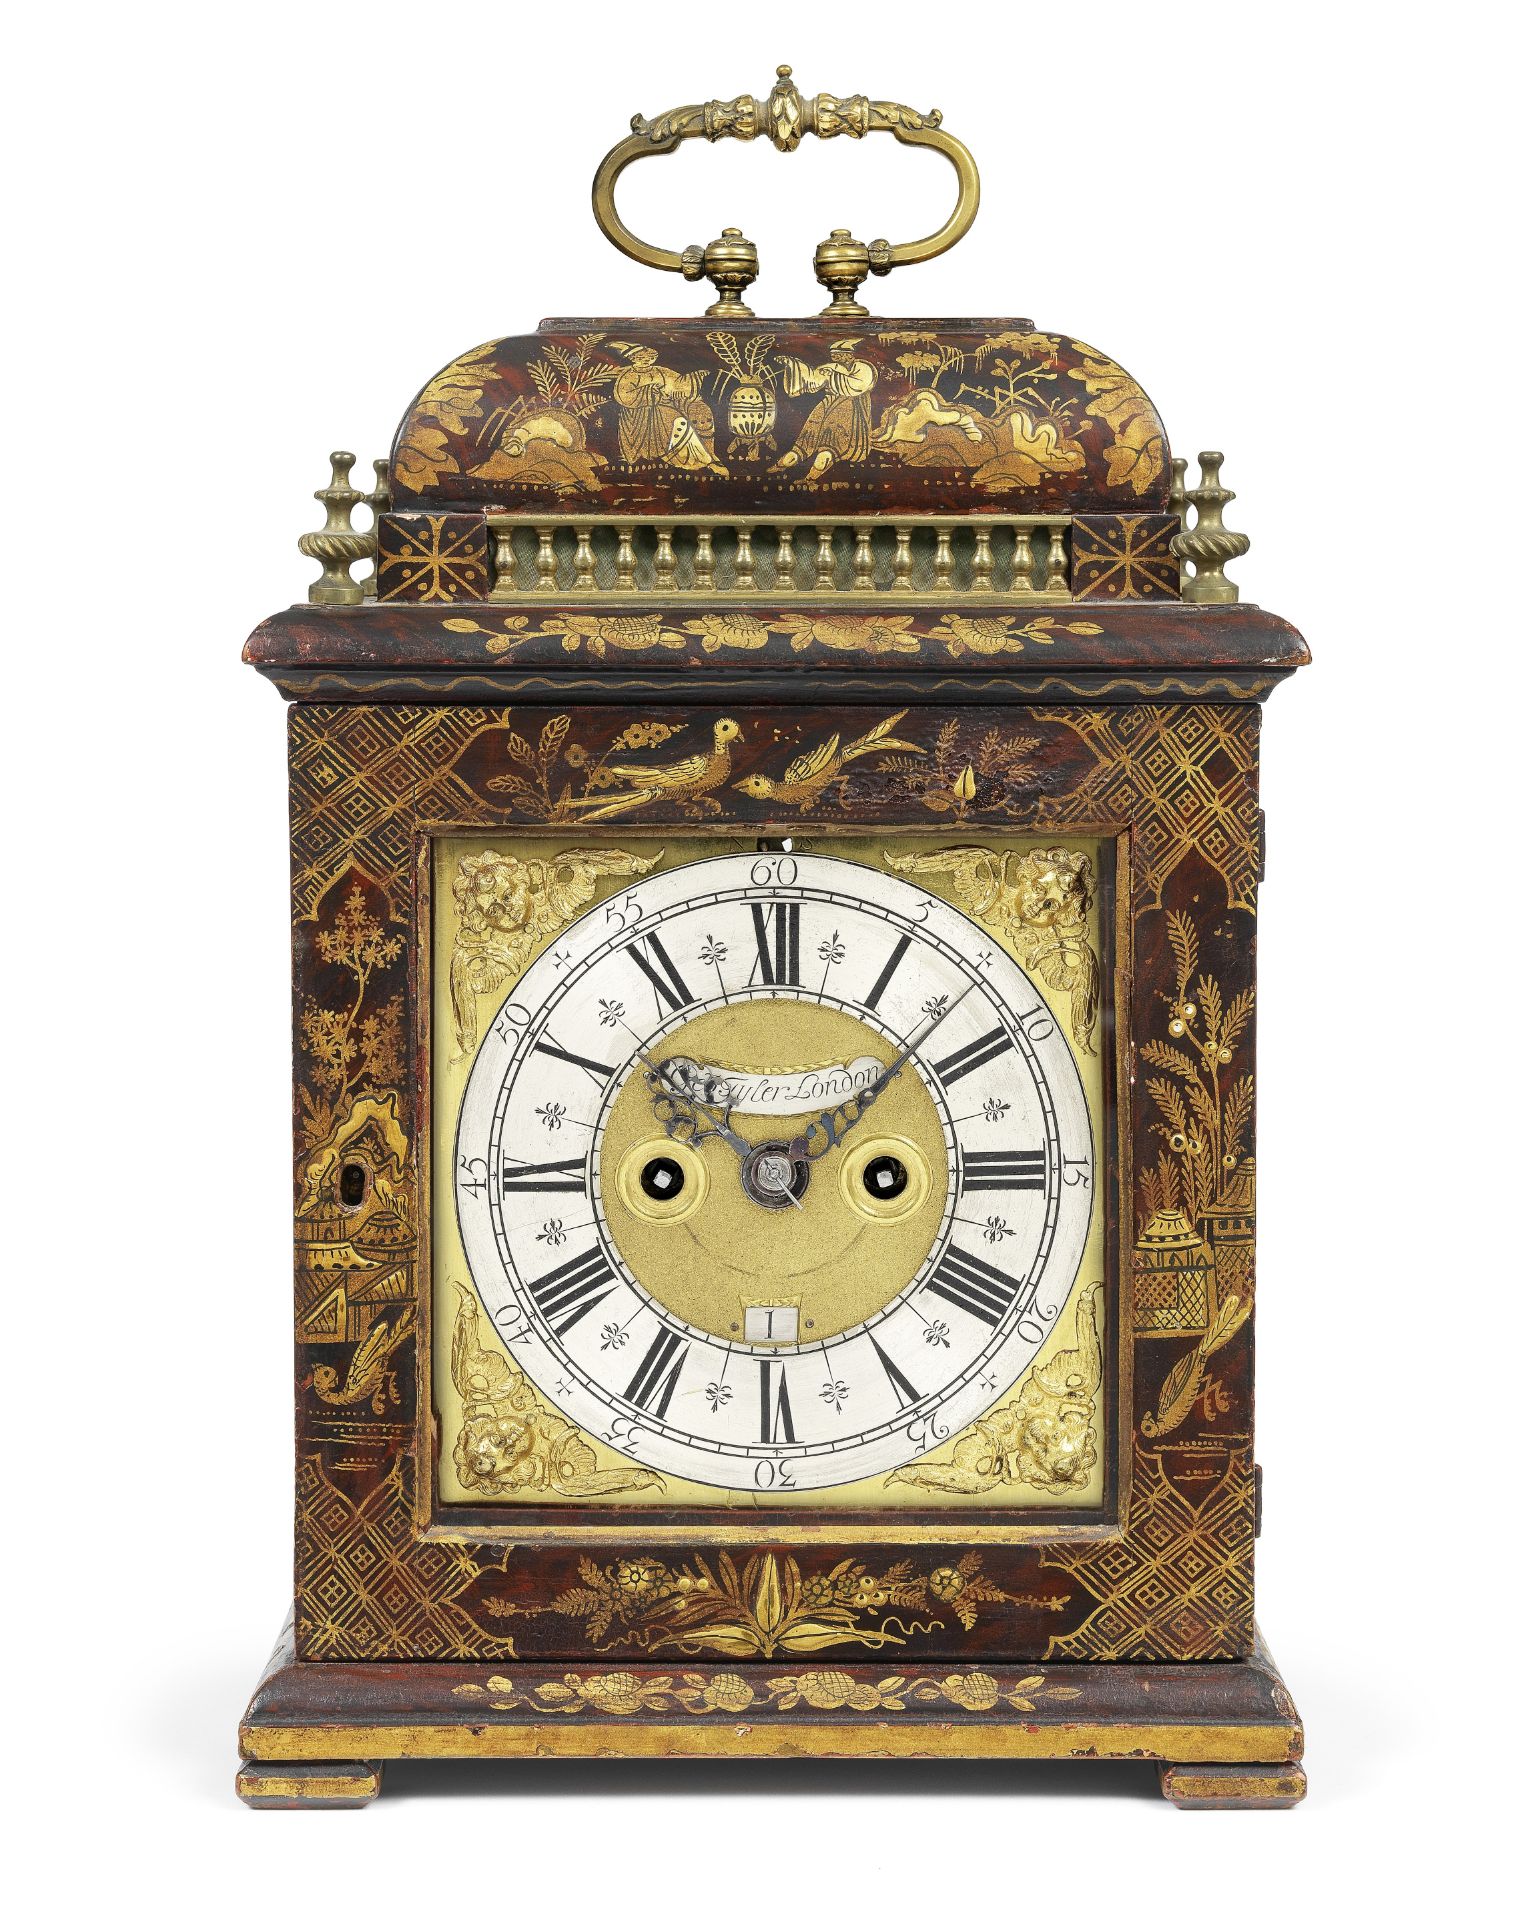 A fine and rare late 17th century Chinoiserie table clock Geo Tyler, Popeshead Alley, London 5